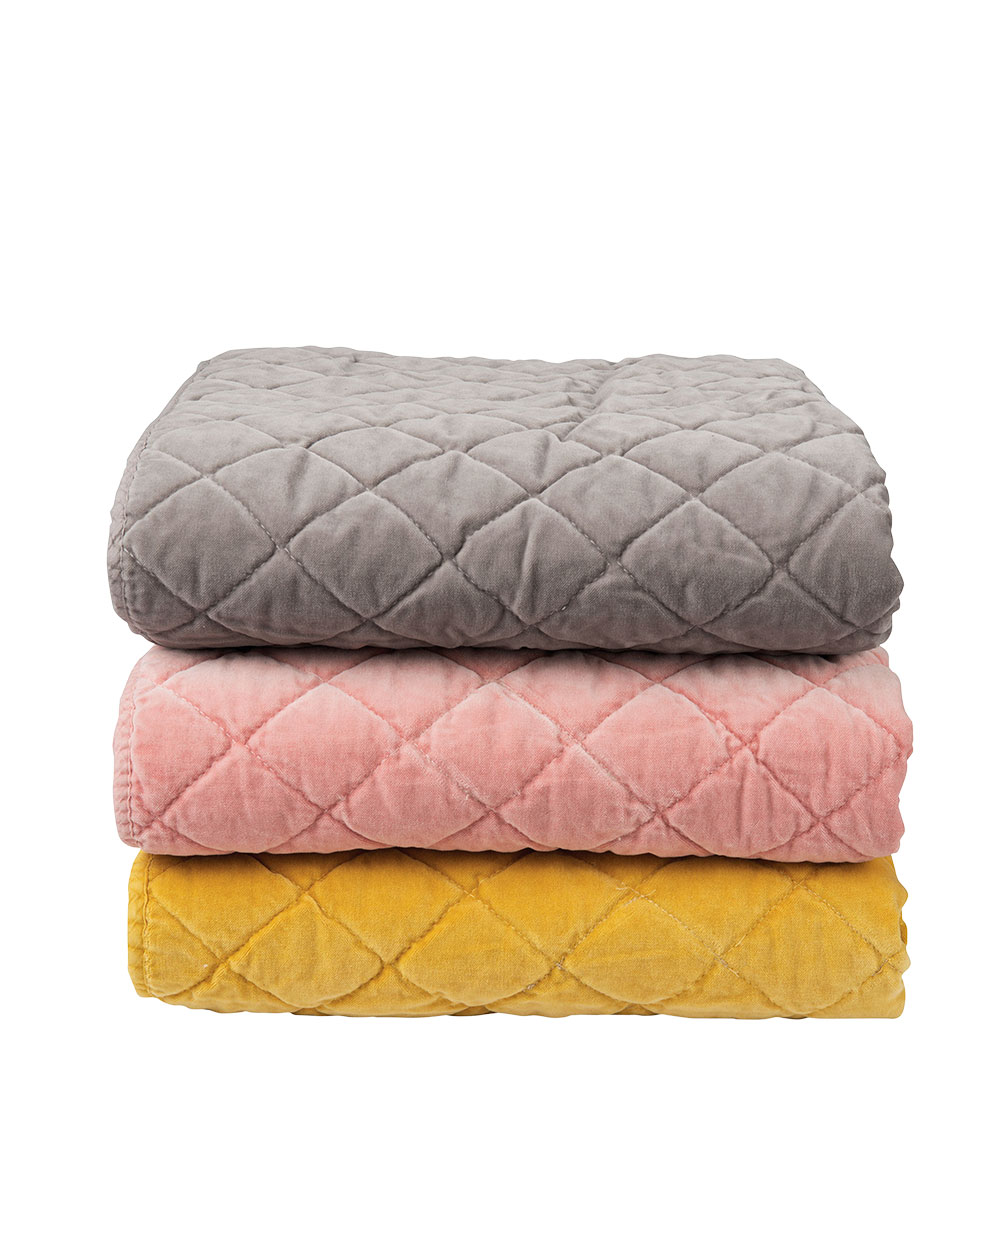 Quilted throws from Corso De' Fiori